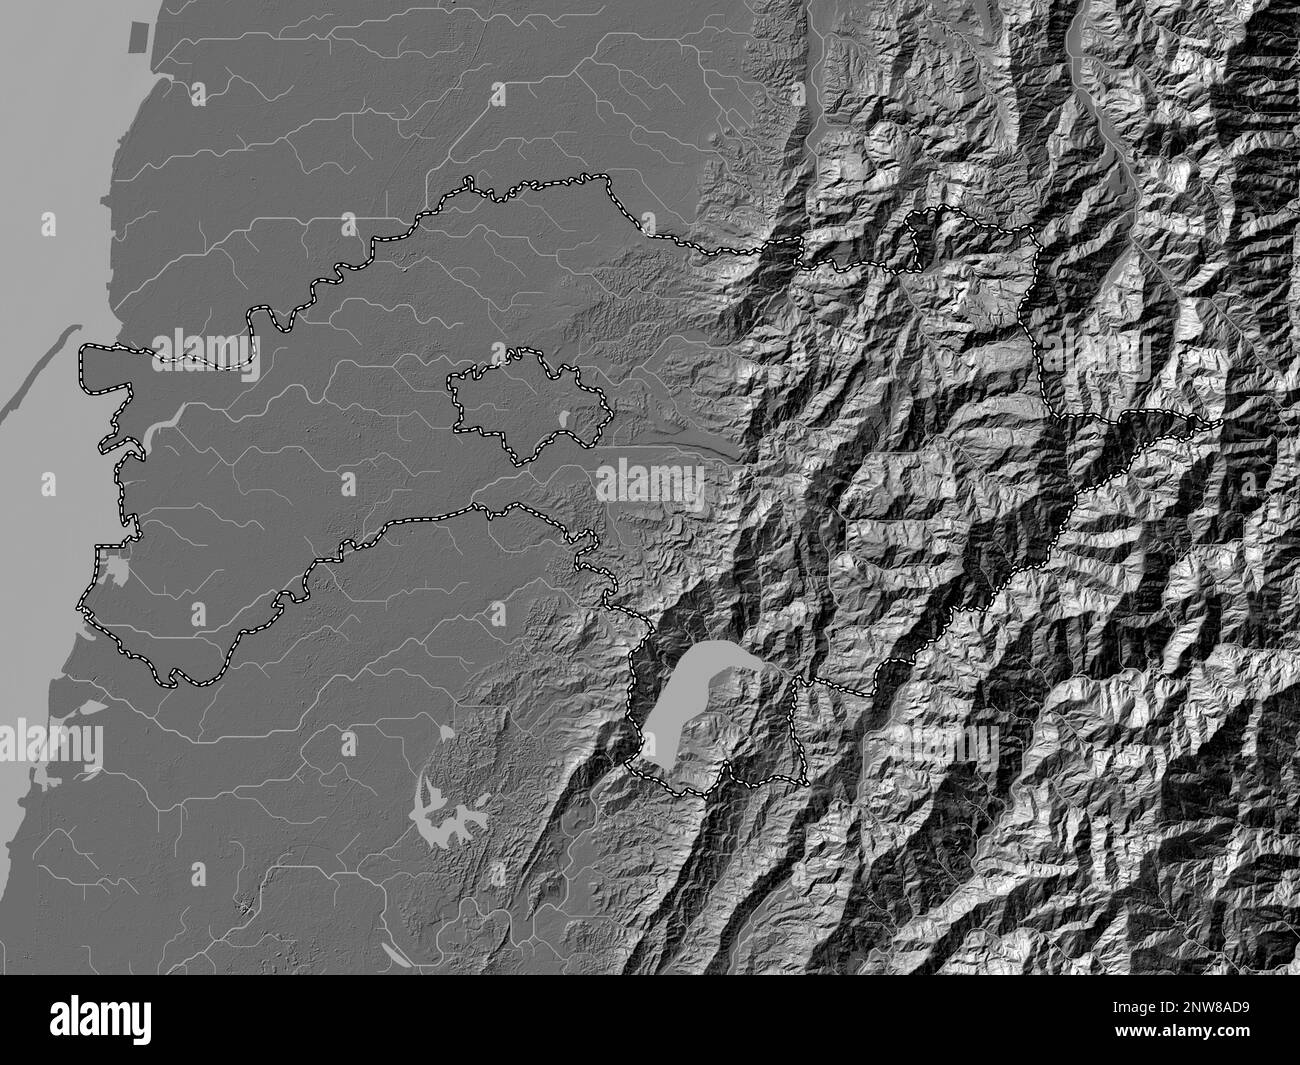 Chiayi, county of Taiwan. Bilevel elevation map with lakes and rivers Stock Photo